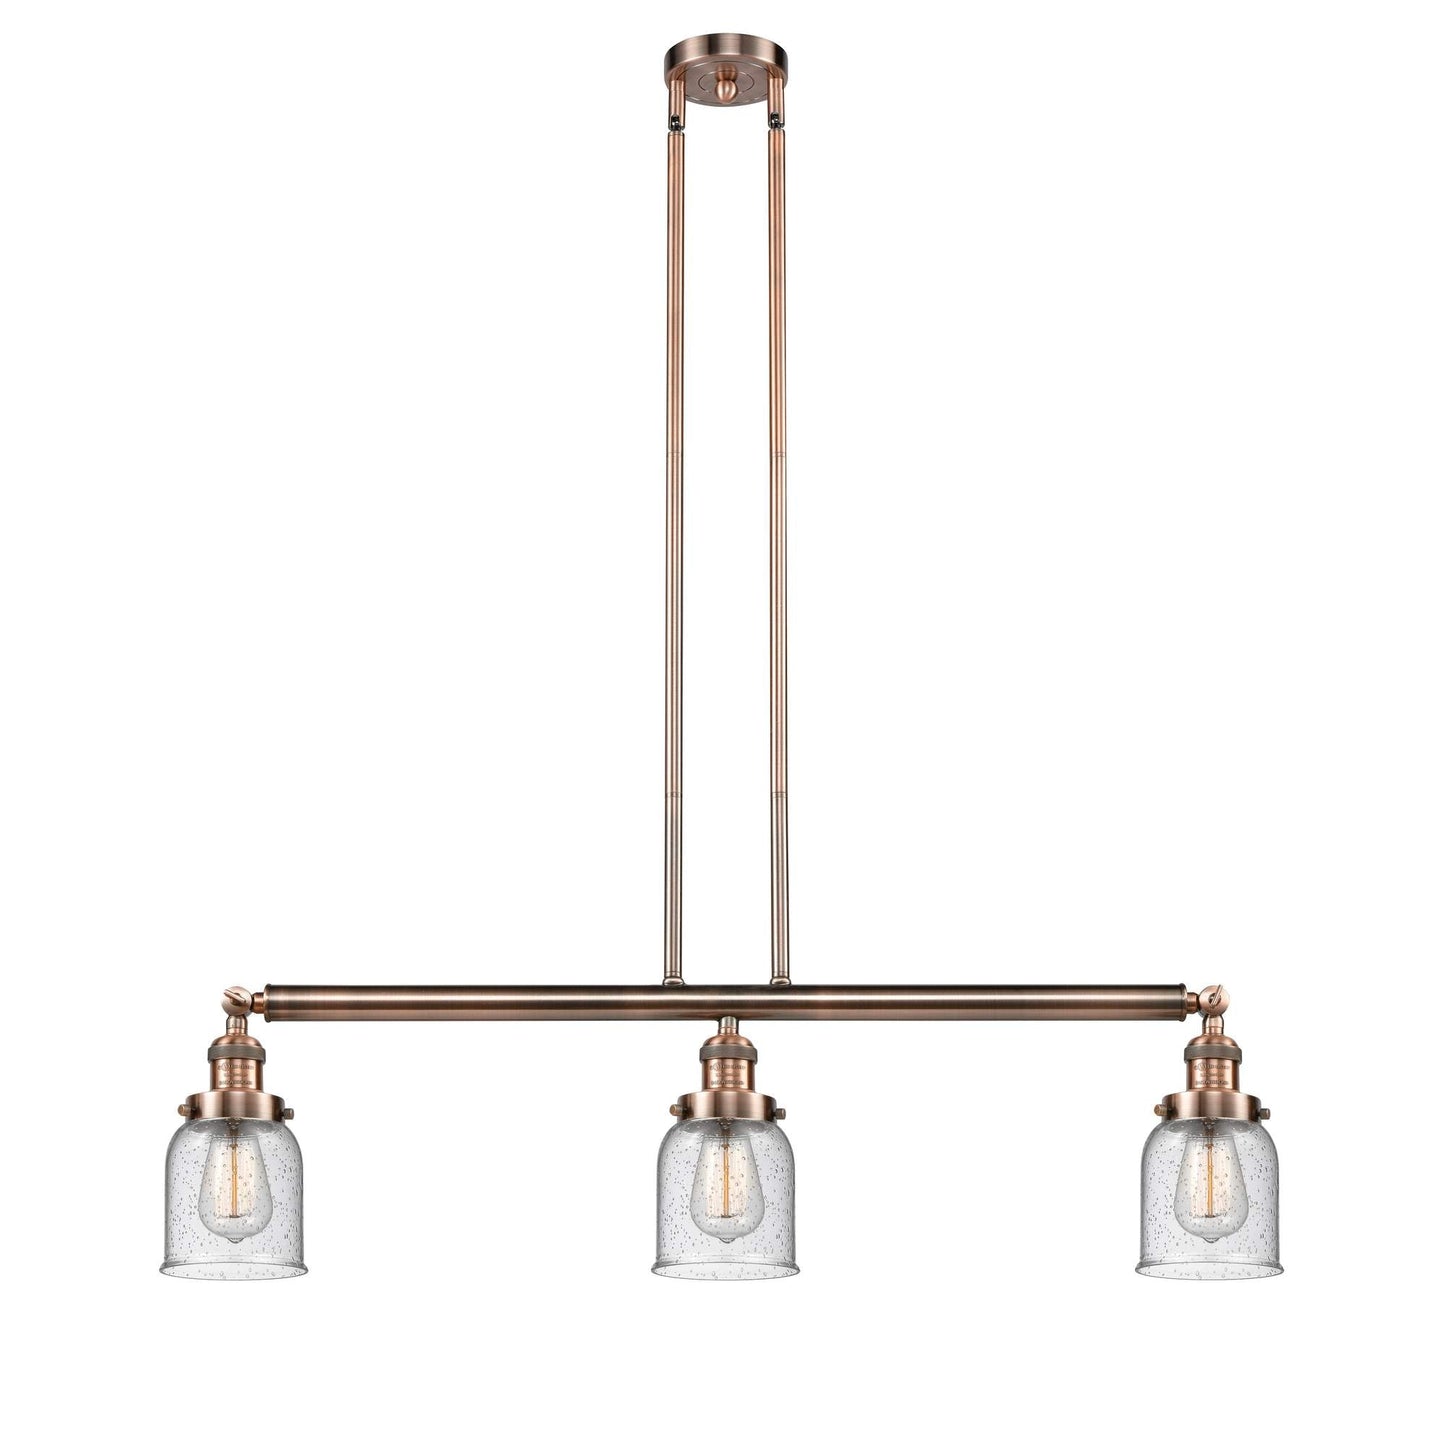 213-AC-G54 3-Light 37.5" Antique Copper Island Light - Seedy Small Bell Glass - LED Bulb - Dimmensions: 37.5 x 7.5 x 10<br>Minimum Height : 20<br>Maximum Height : 44 - Sloped Ceiling Compatible: Yes